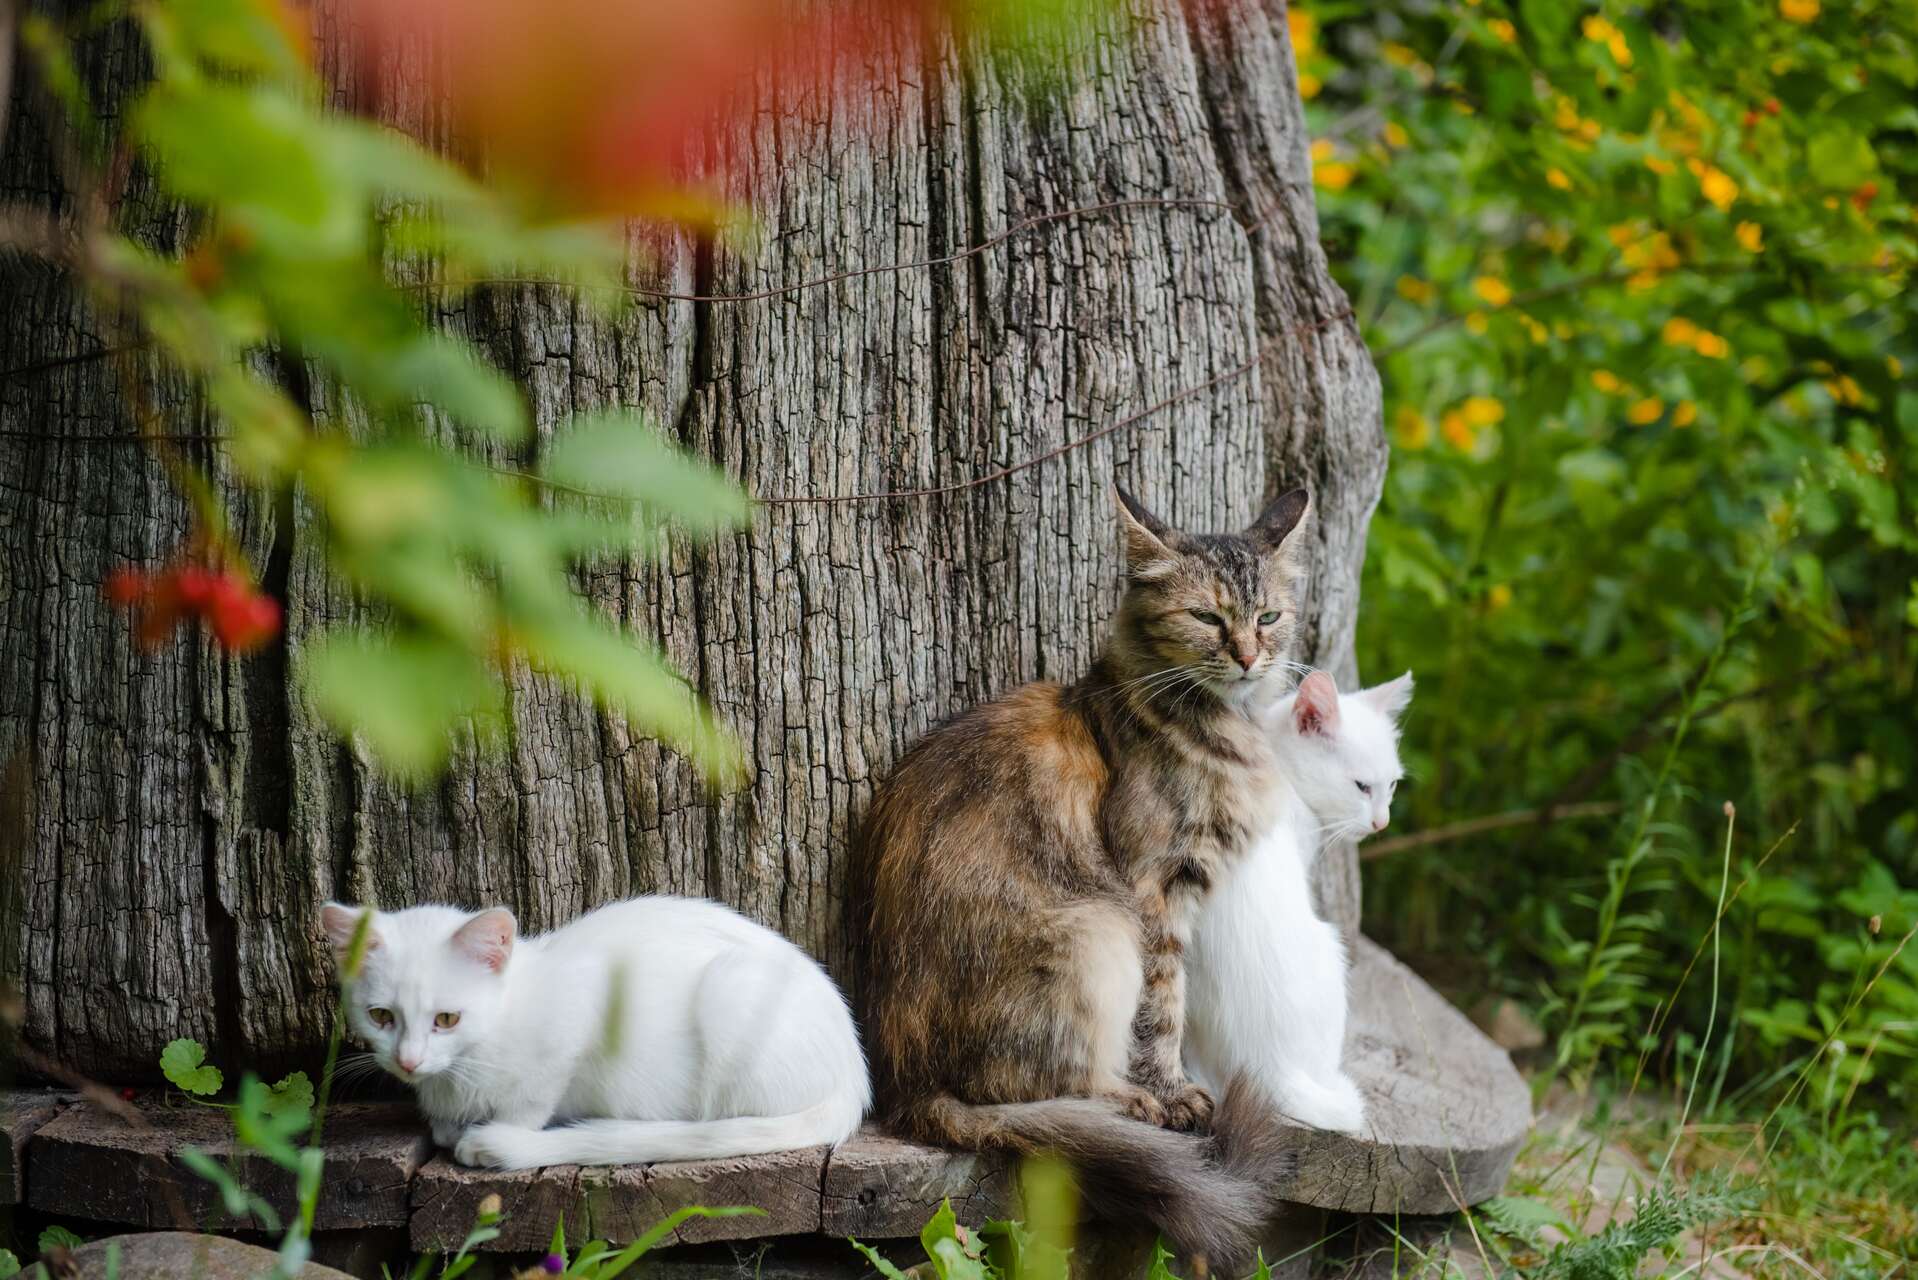 A group of three cats sitting by a tree